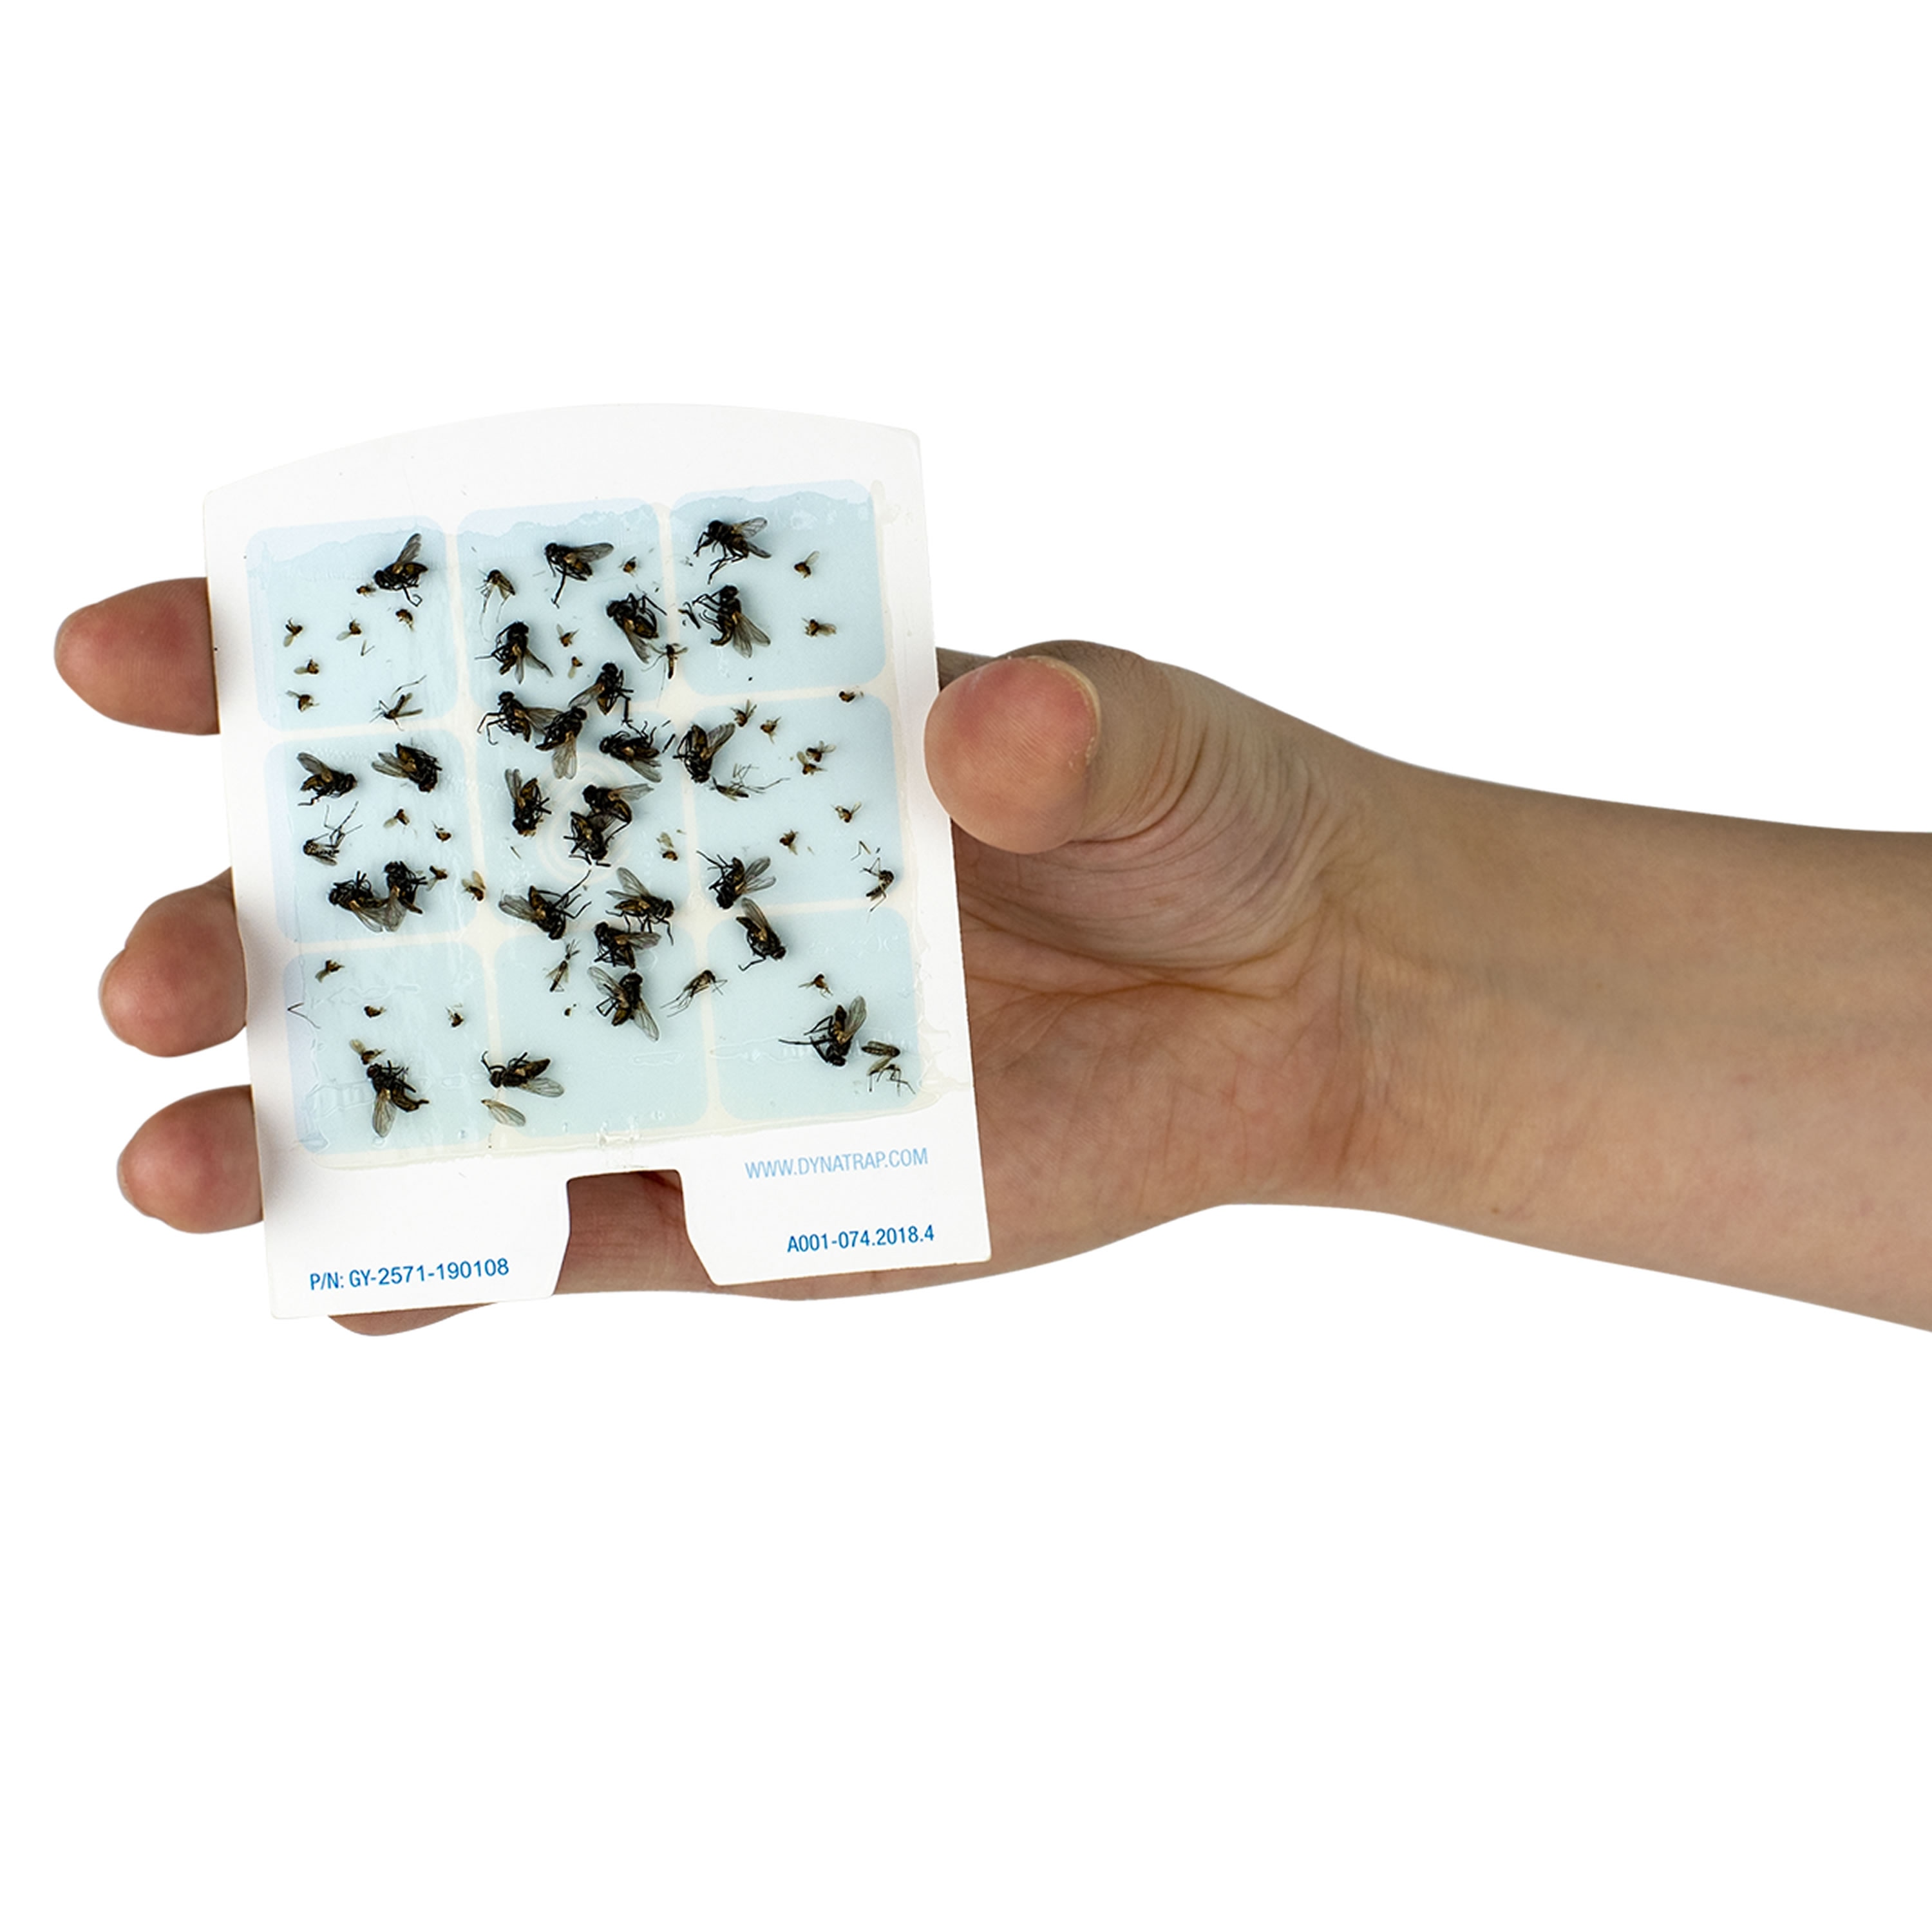 DynaTrap 23005-0612 DOT StickyTech Replacement Indoor Flying Insect Trap  Glue Cards - 6 Pack